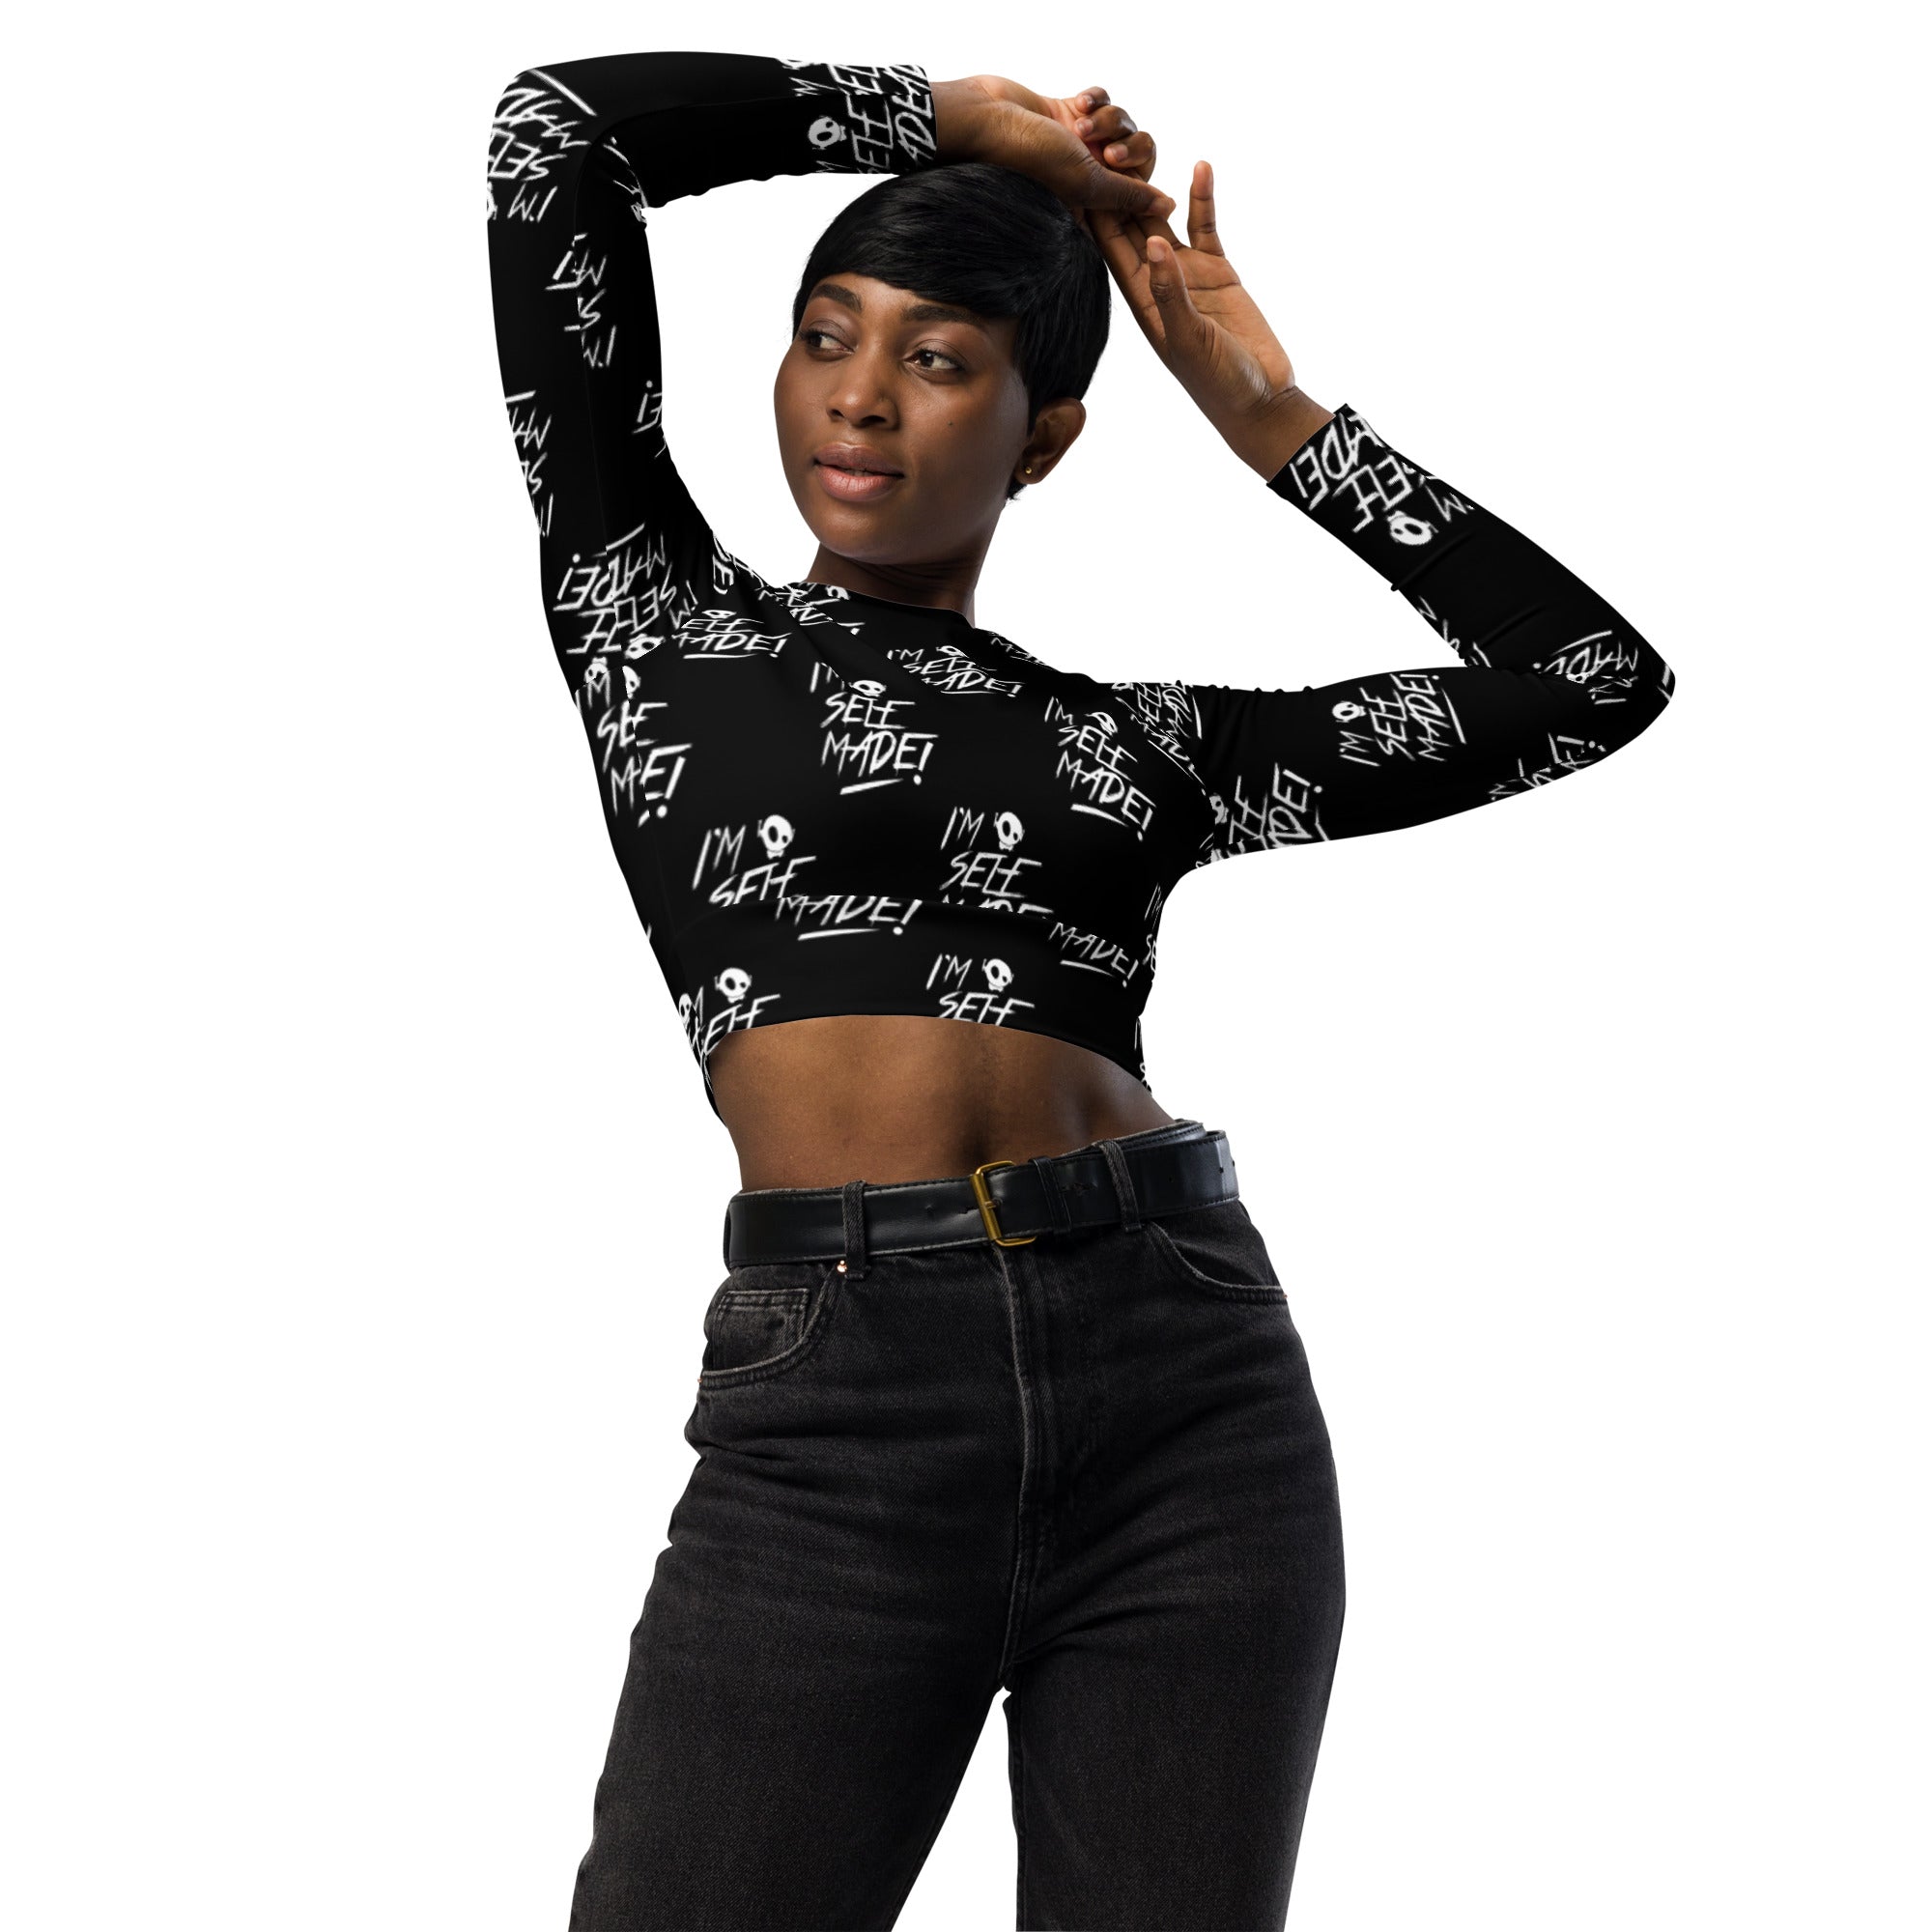 "SELF MADE!" ALL-OVER BLK RECYCLED LS CROP TOP